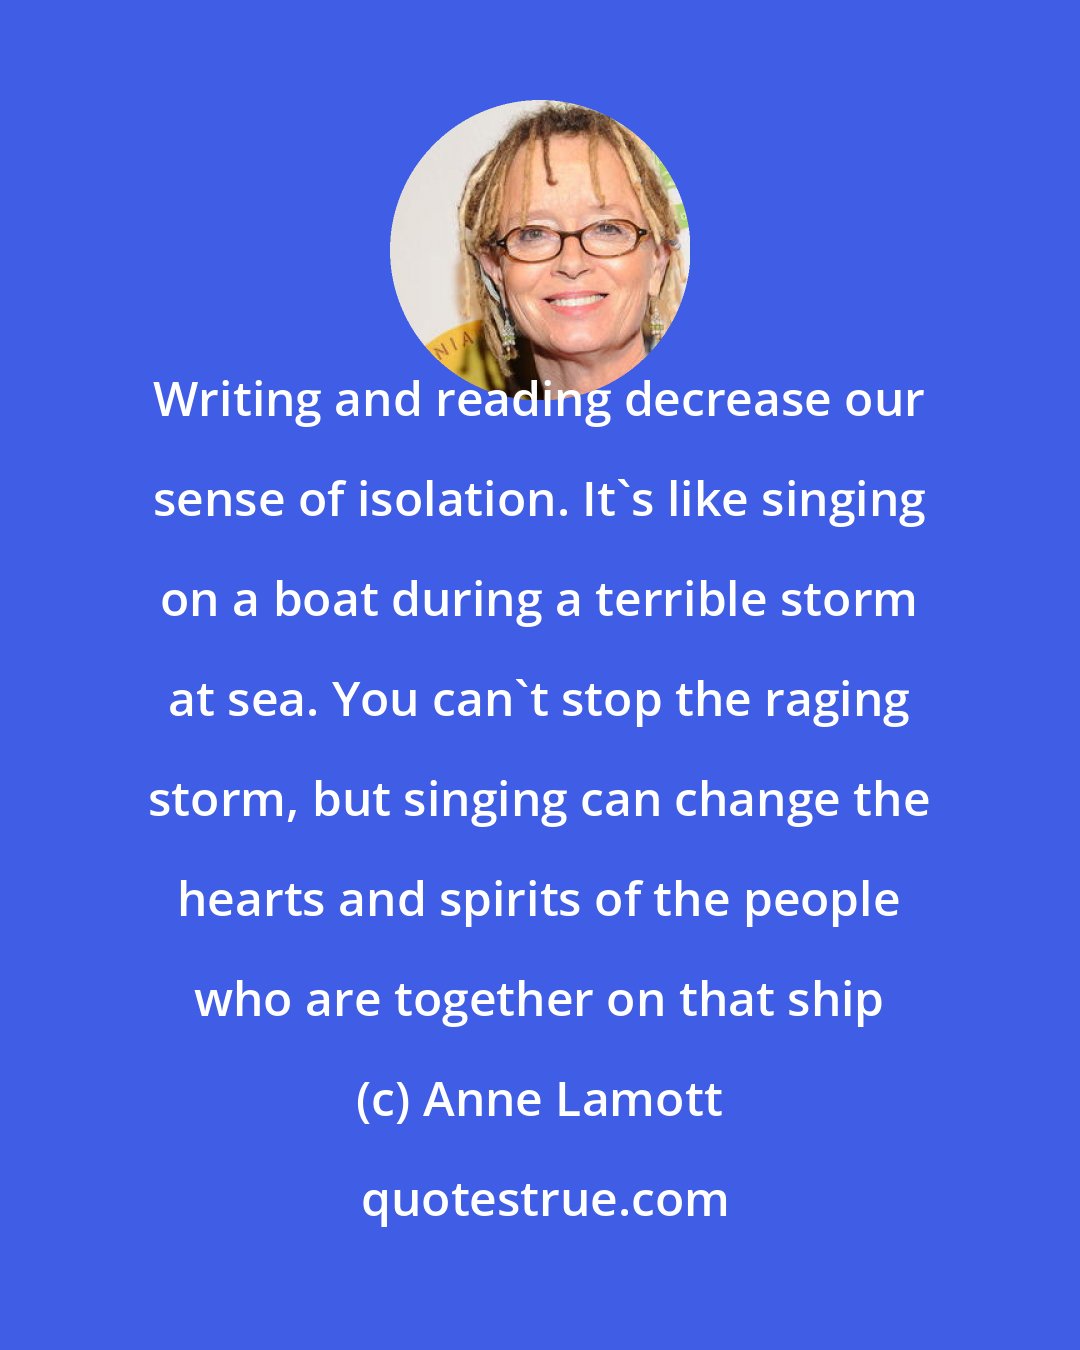 Anne Lamott: Writing and reading decrease our sense of isolation. It's like singing on a boat during a terrible storm at sea. You can't stop the raging storm, but singing can change the hearts and spirits of the people who are together on that ship